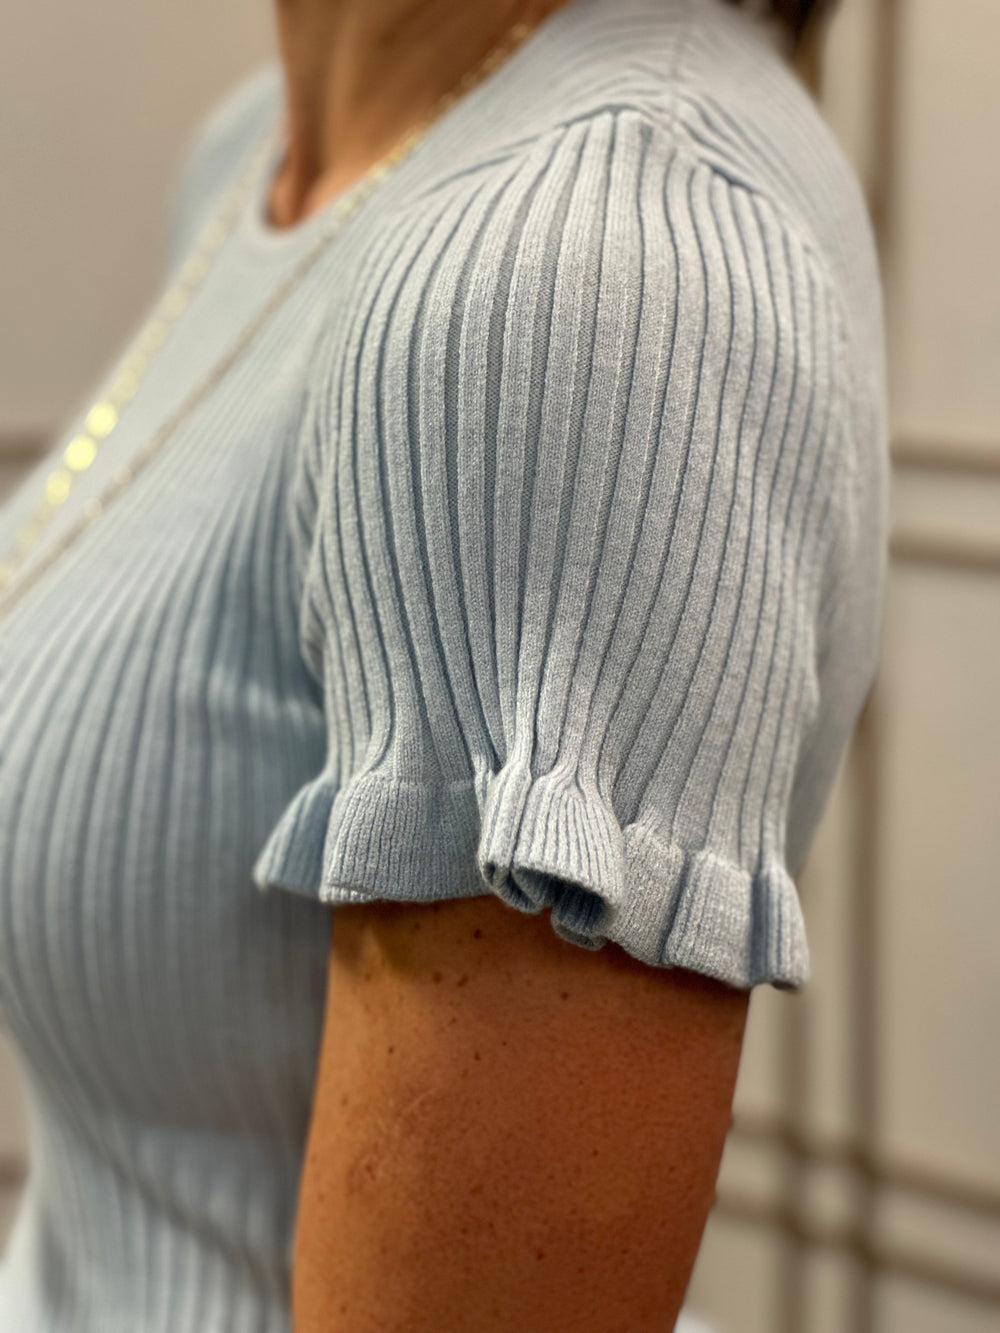 Short Sleeve Ruffle Detail Knit Top-Short Sleeves-Gilli-Evergreen Boutique, Women’s Fashion Boutique in Santa Claus, Indiana